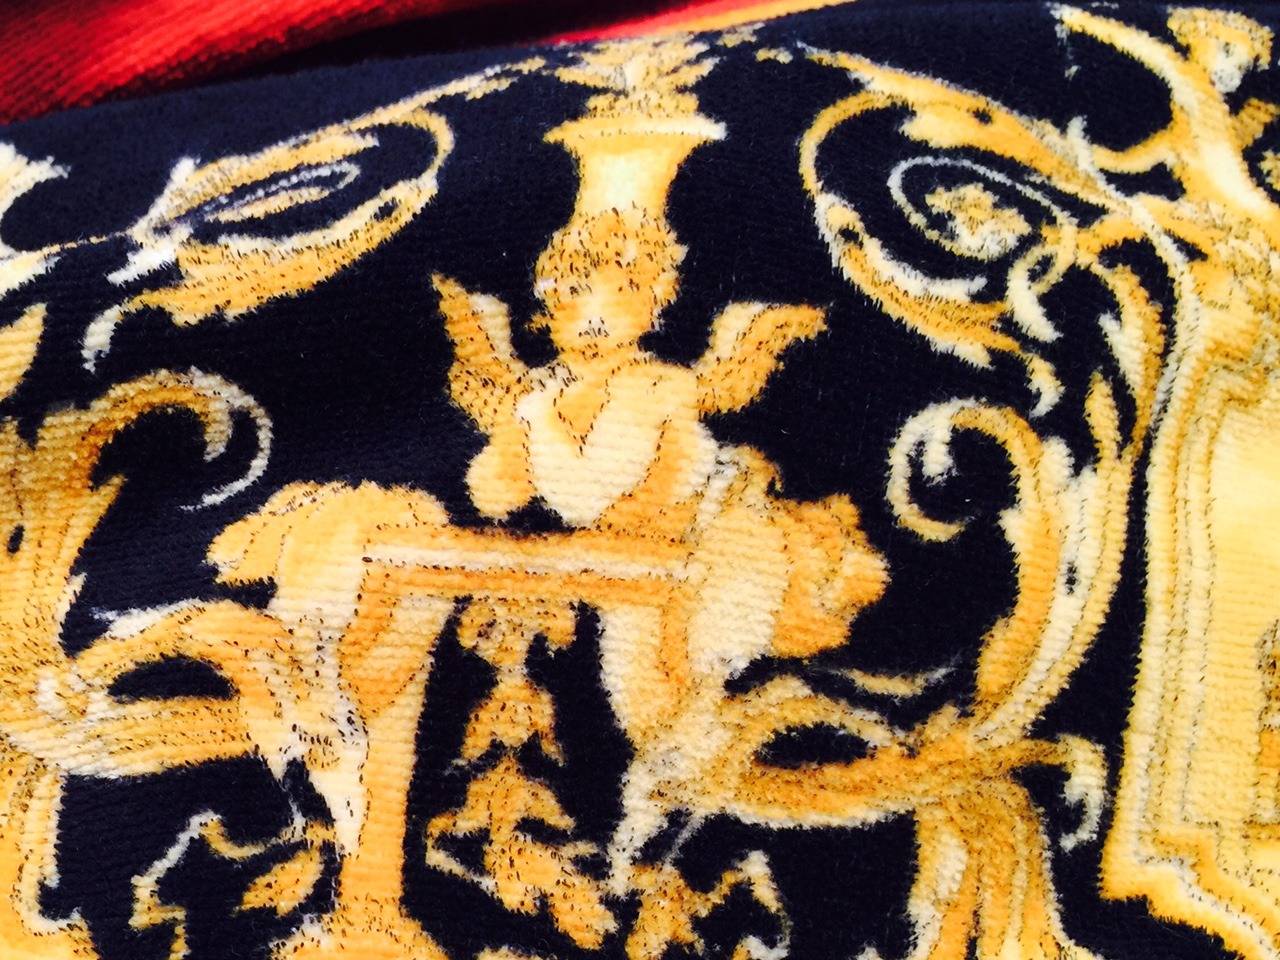 Vintage Gianni Versace Unisex Baroque Robe In Excellent Condition For Sale In Palm Beach, FL